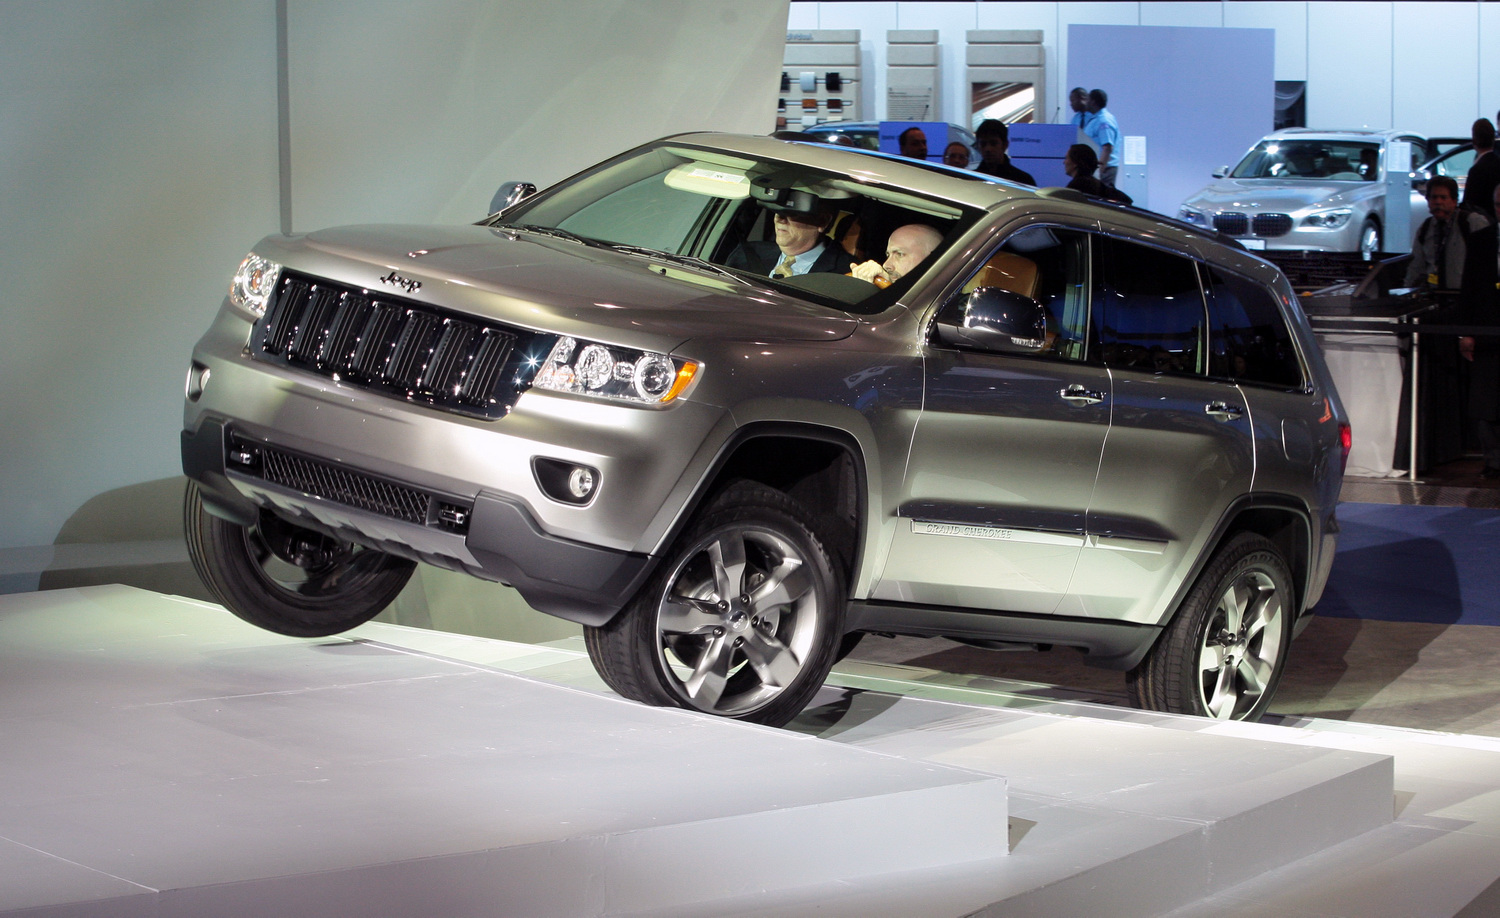 Live Photos of the new 2011 Jeep Grand Cherokee from New York